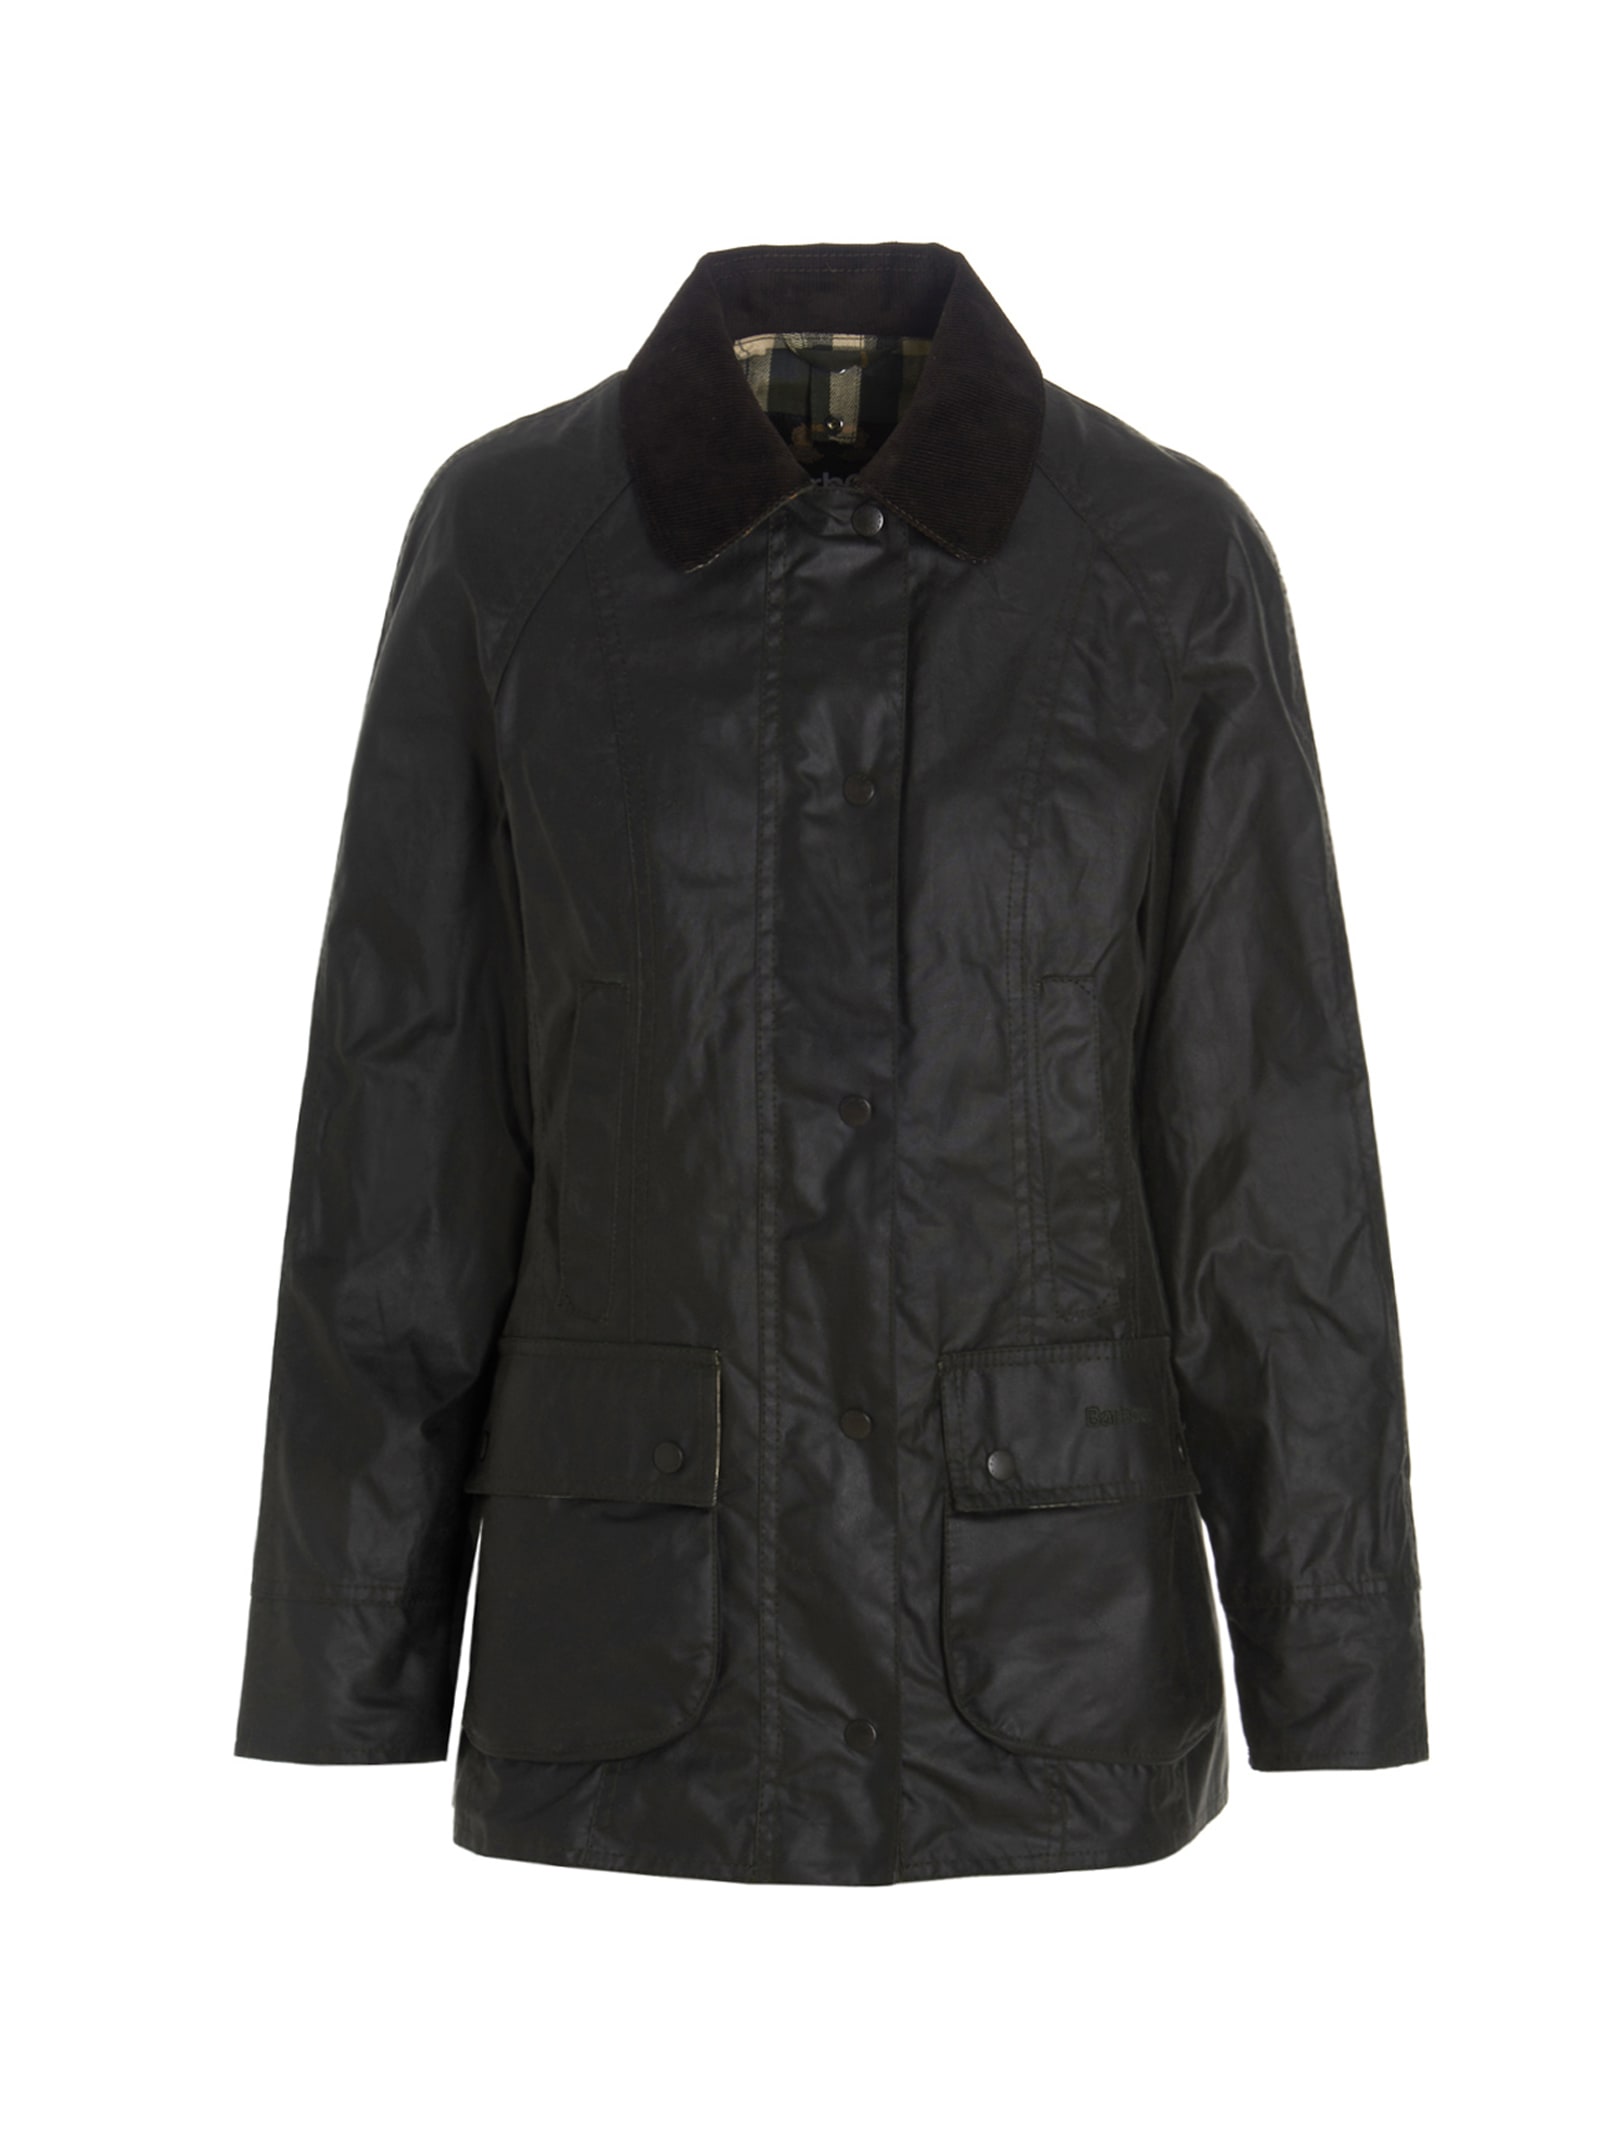 Barbour beadnell Jacket